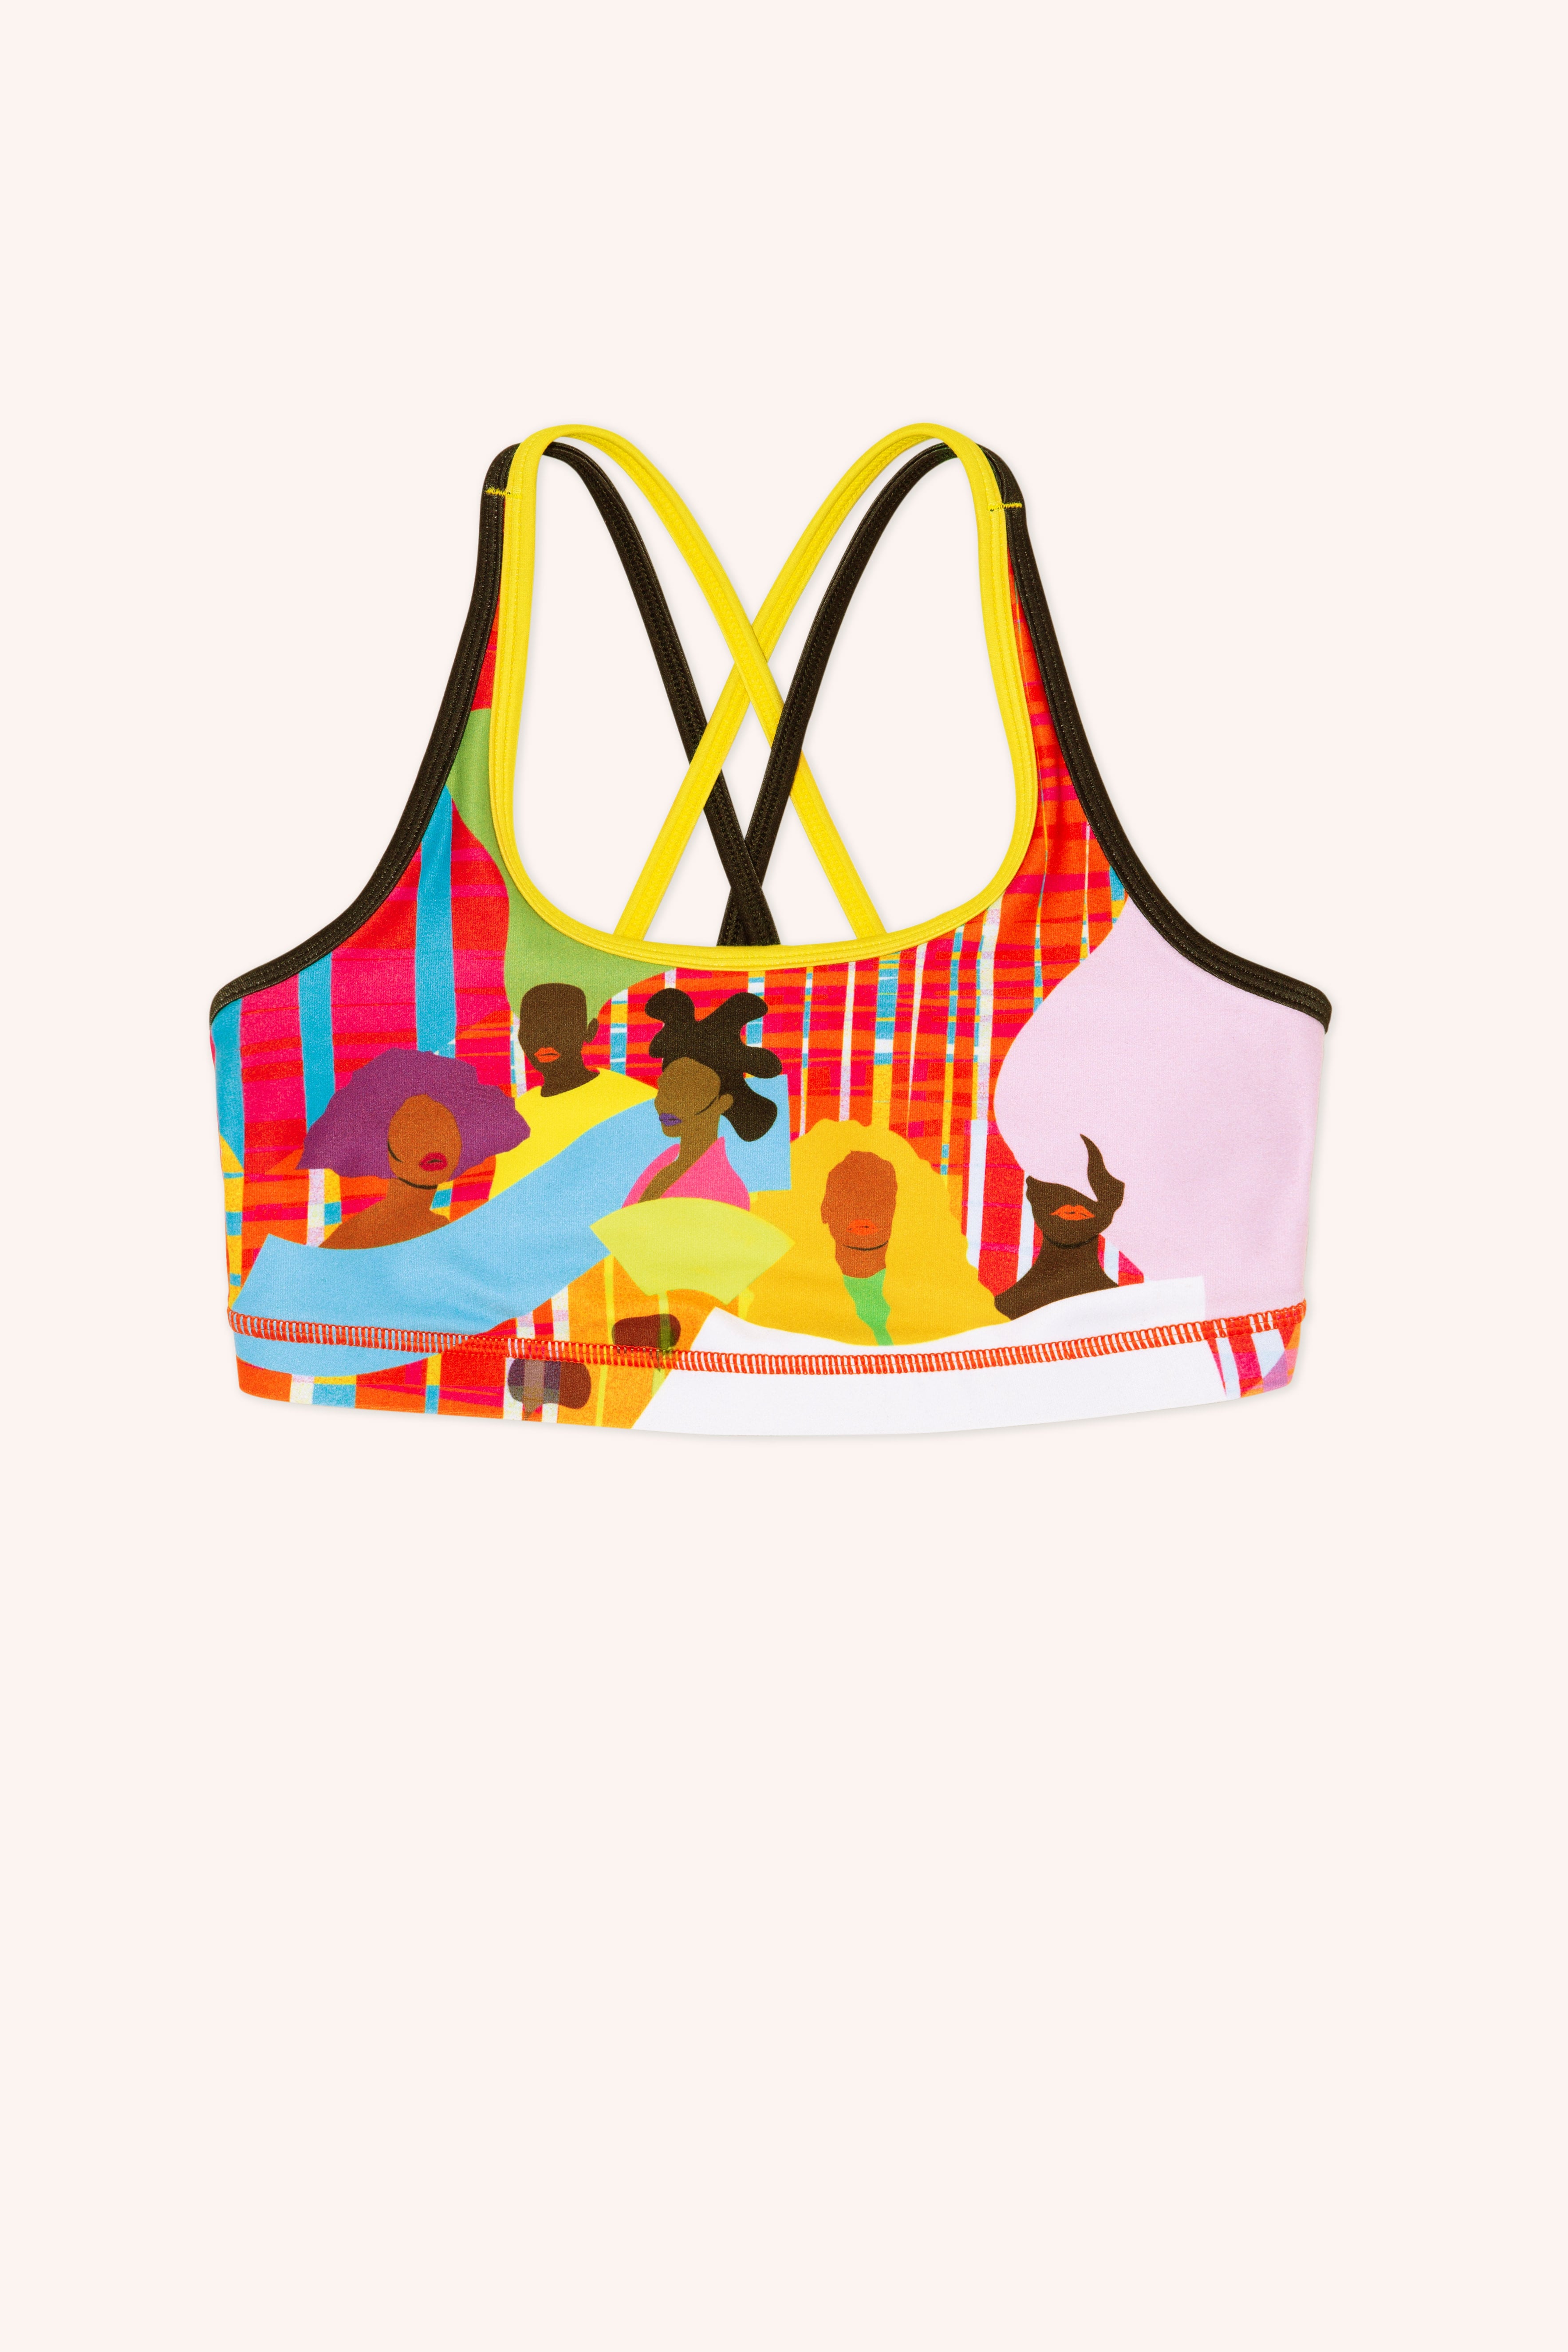 Peloton WITH for x Temi Coker High Neck BLM Black History Month Sports Bra  Size XL - $41 - From Peggy